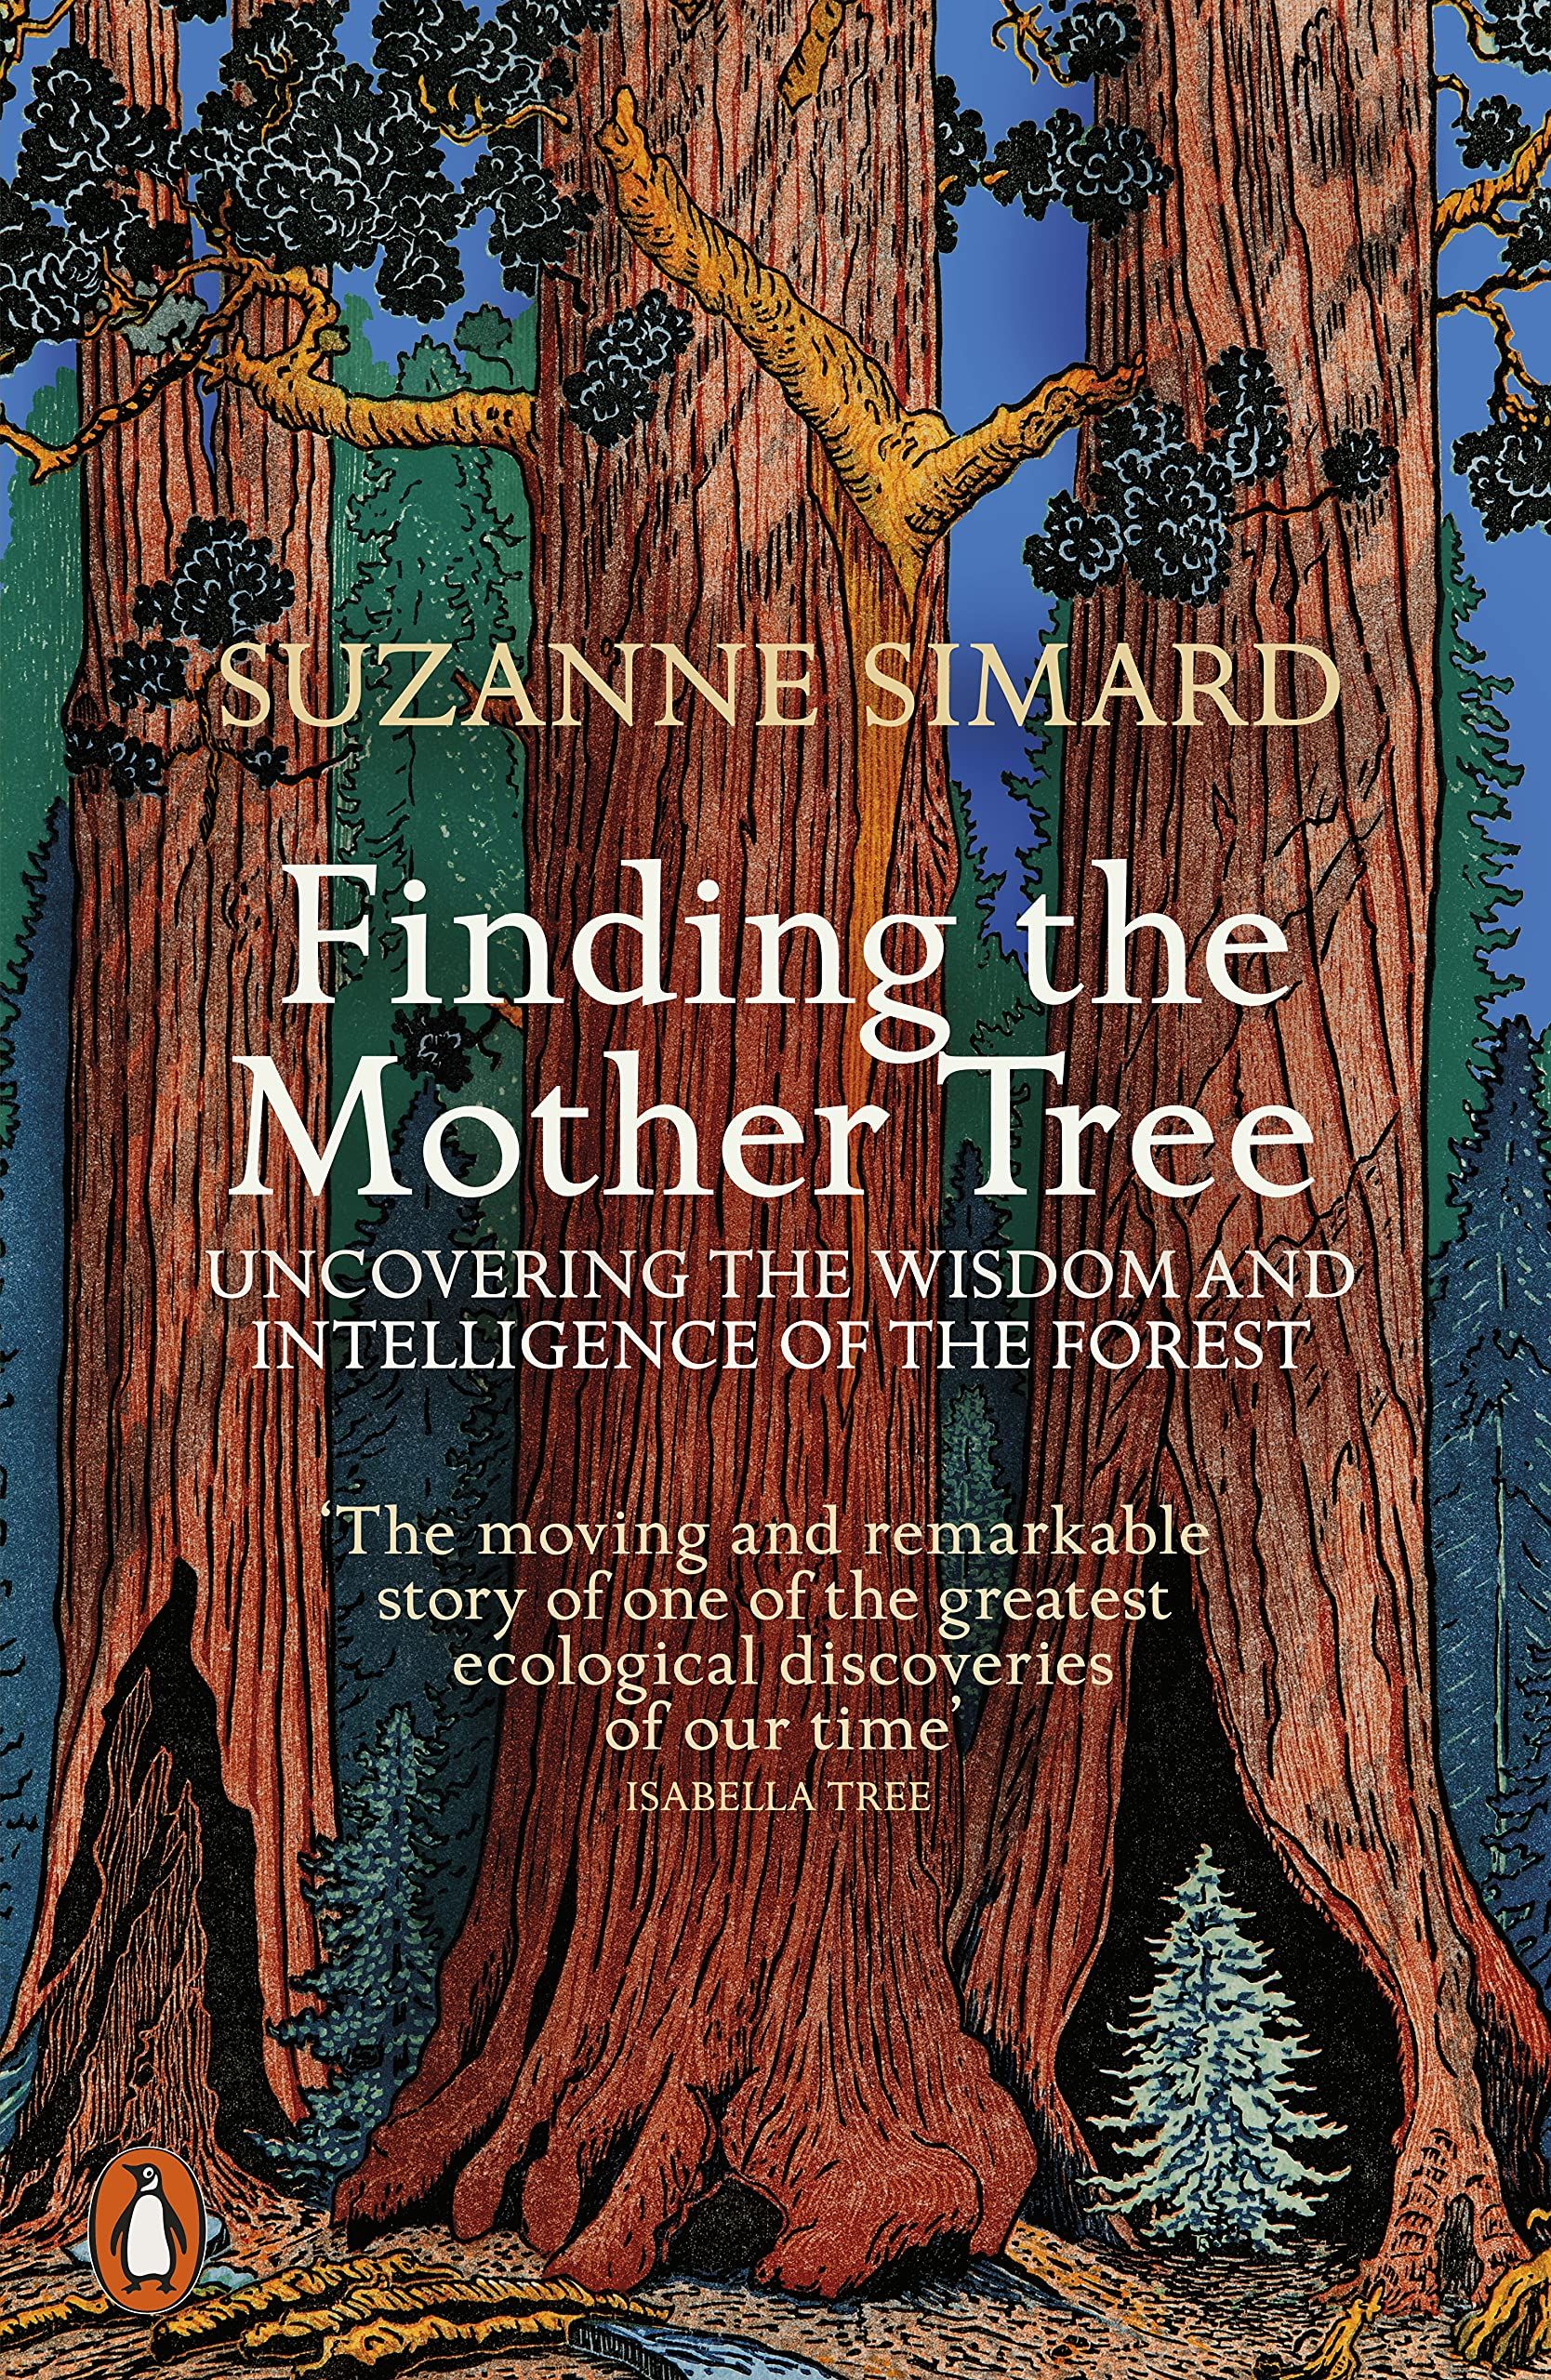 Finding the Mother Tree: Uncovering the wisdom and intelligence of the forest